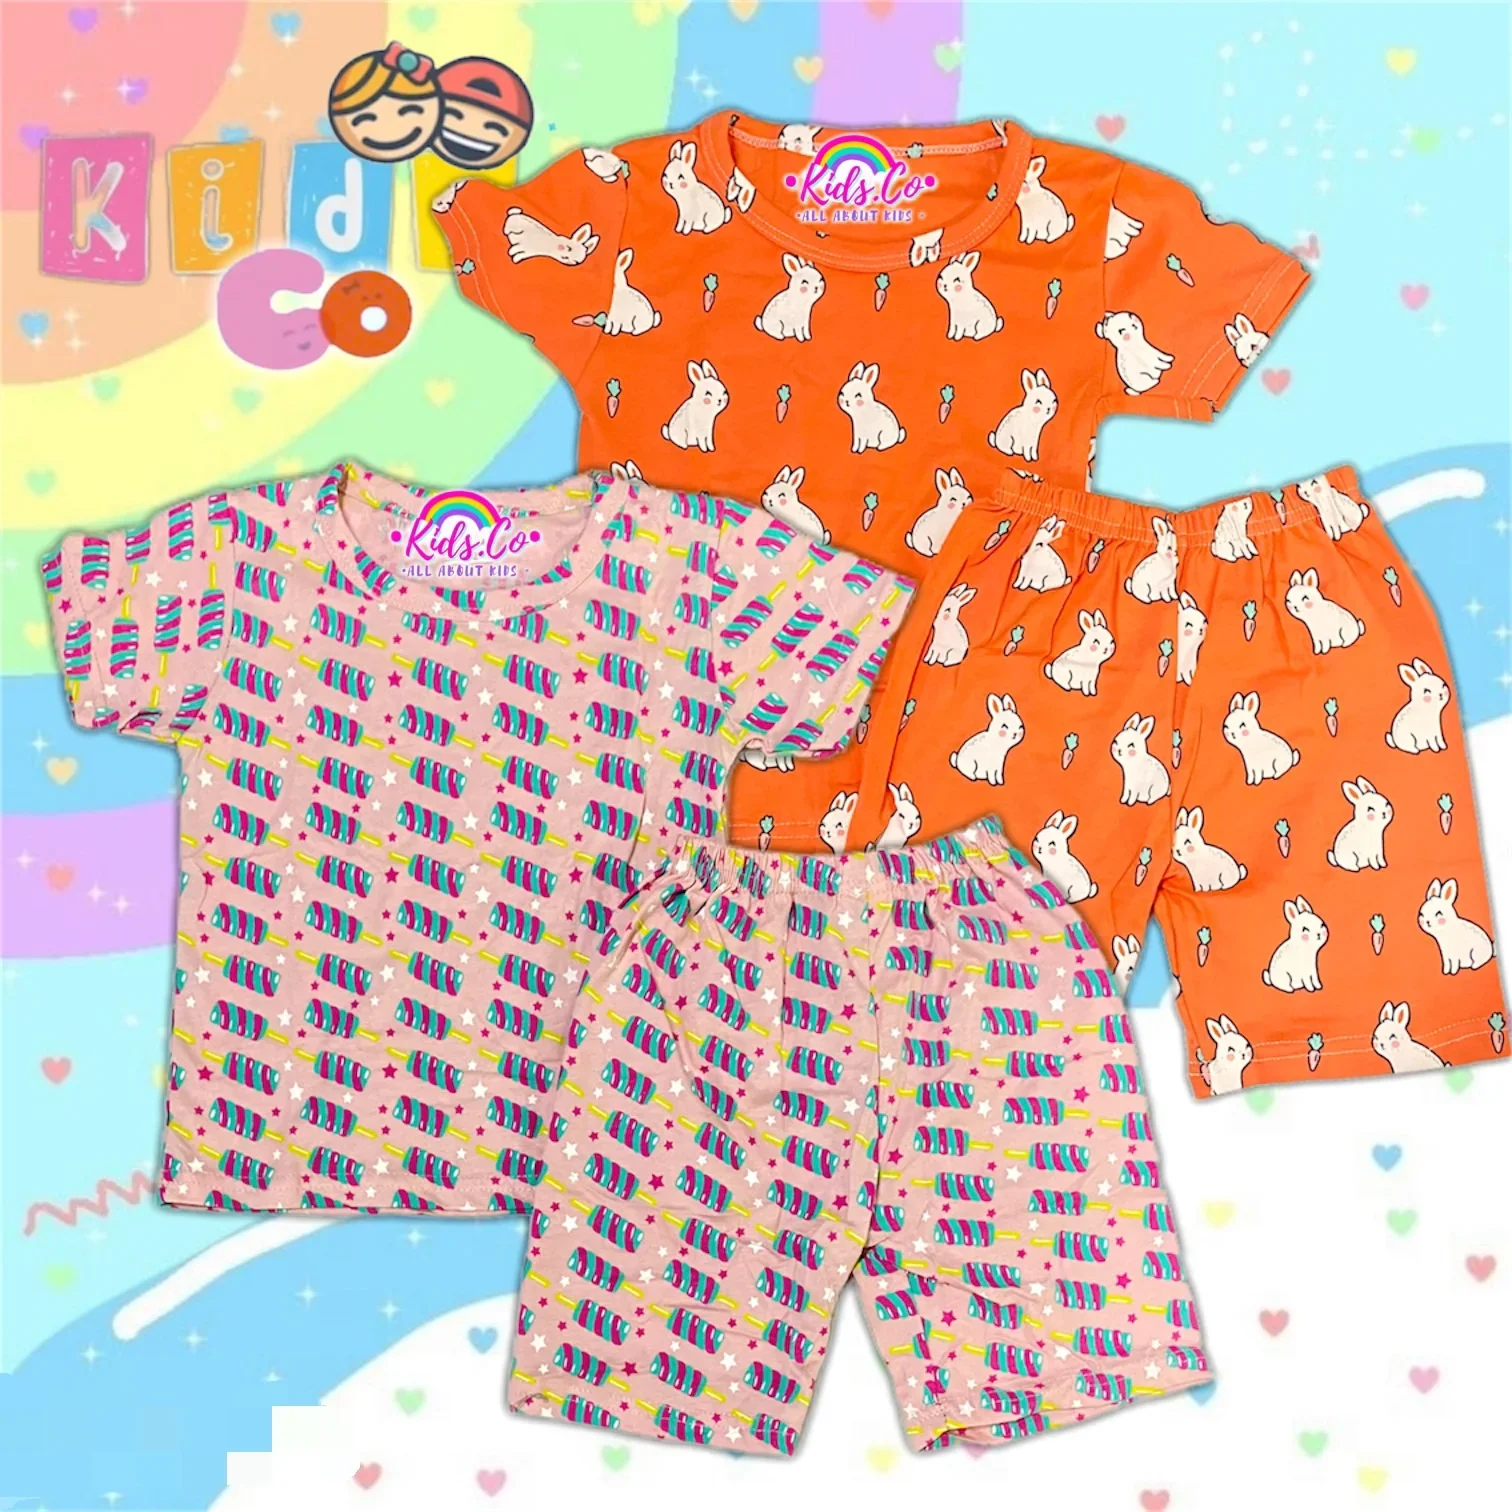 Playset Colourful Candy Printed Full Cotton Kids Size